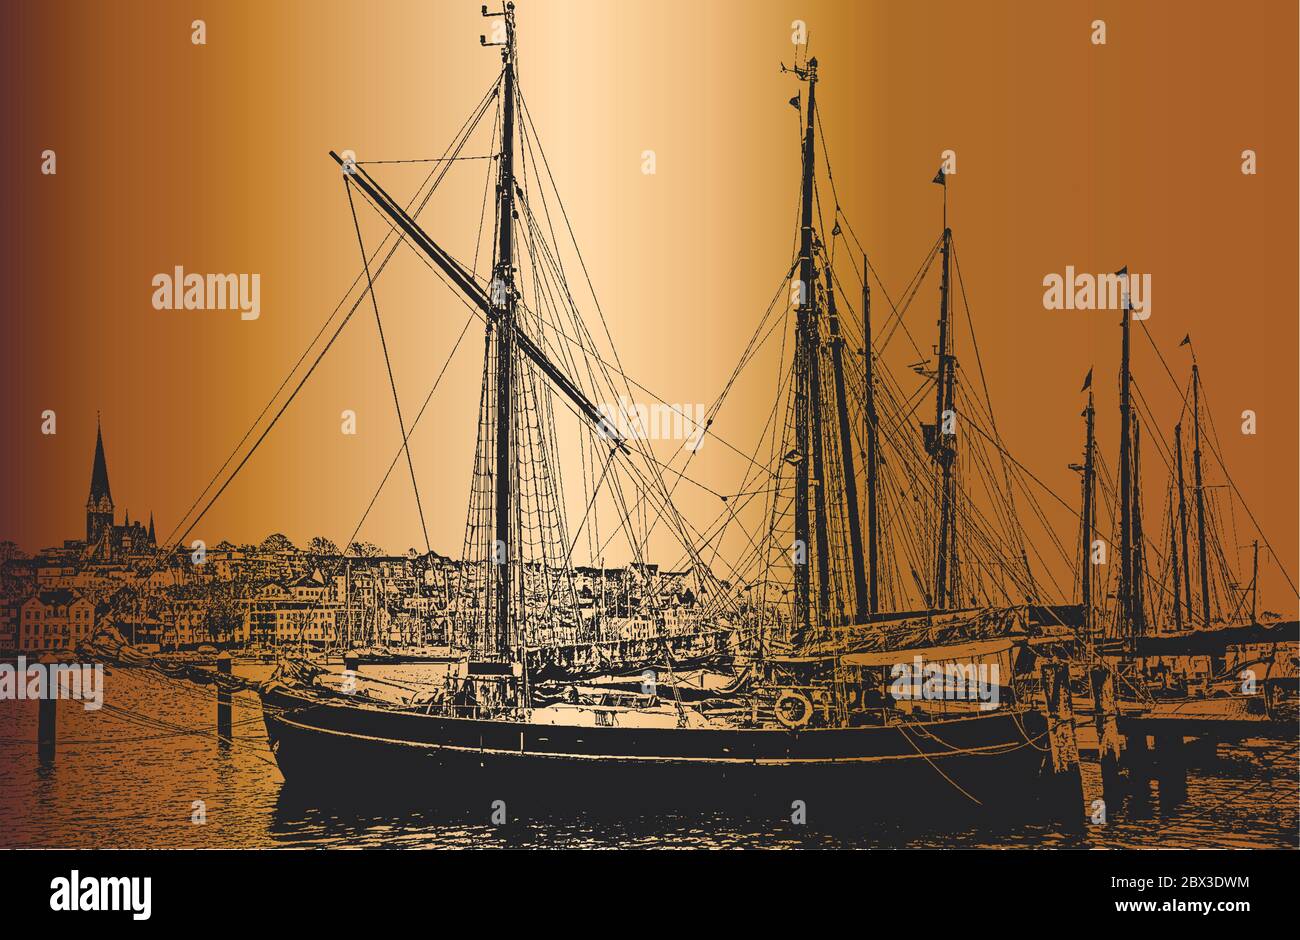 Berth for yachts and boats in the seaport. The ocean yachts is securely moored at the pier of the passenger terminal of the port. Vintage hand drawn v Stock Vector